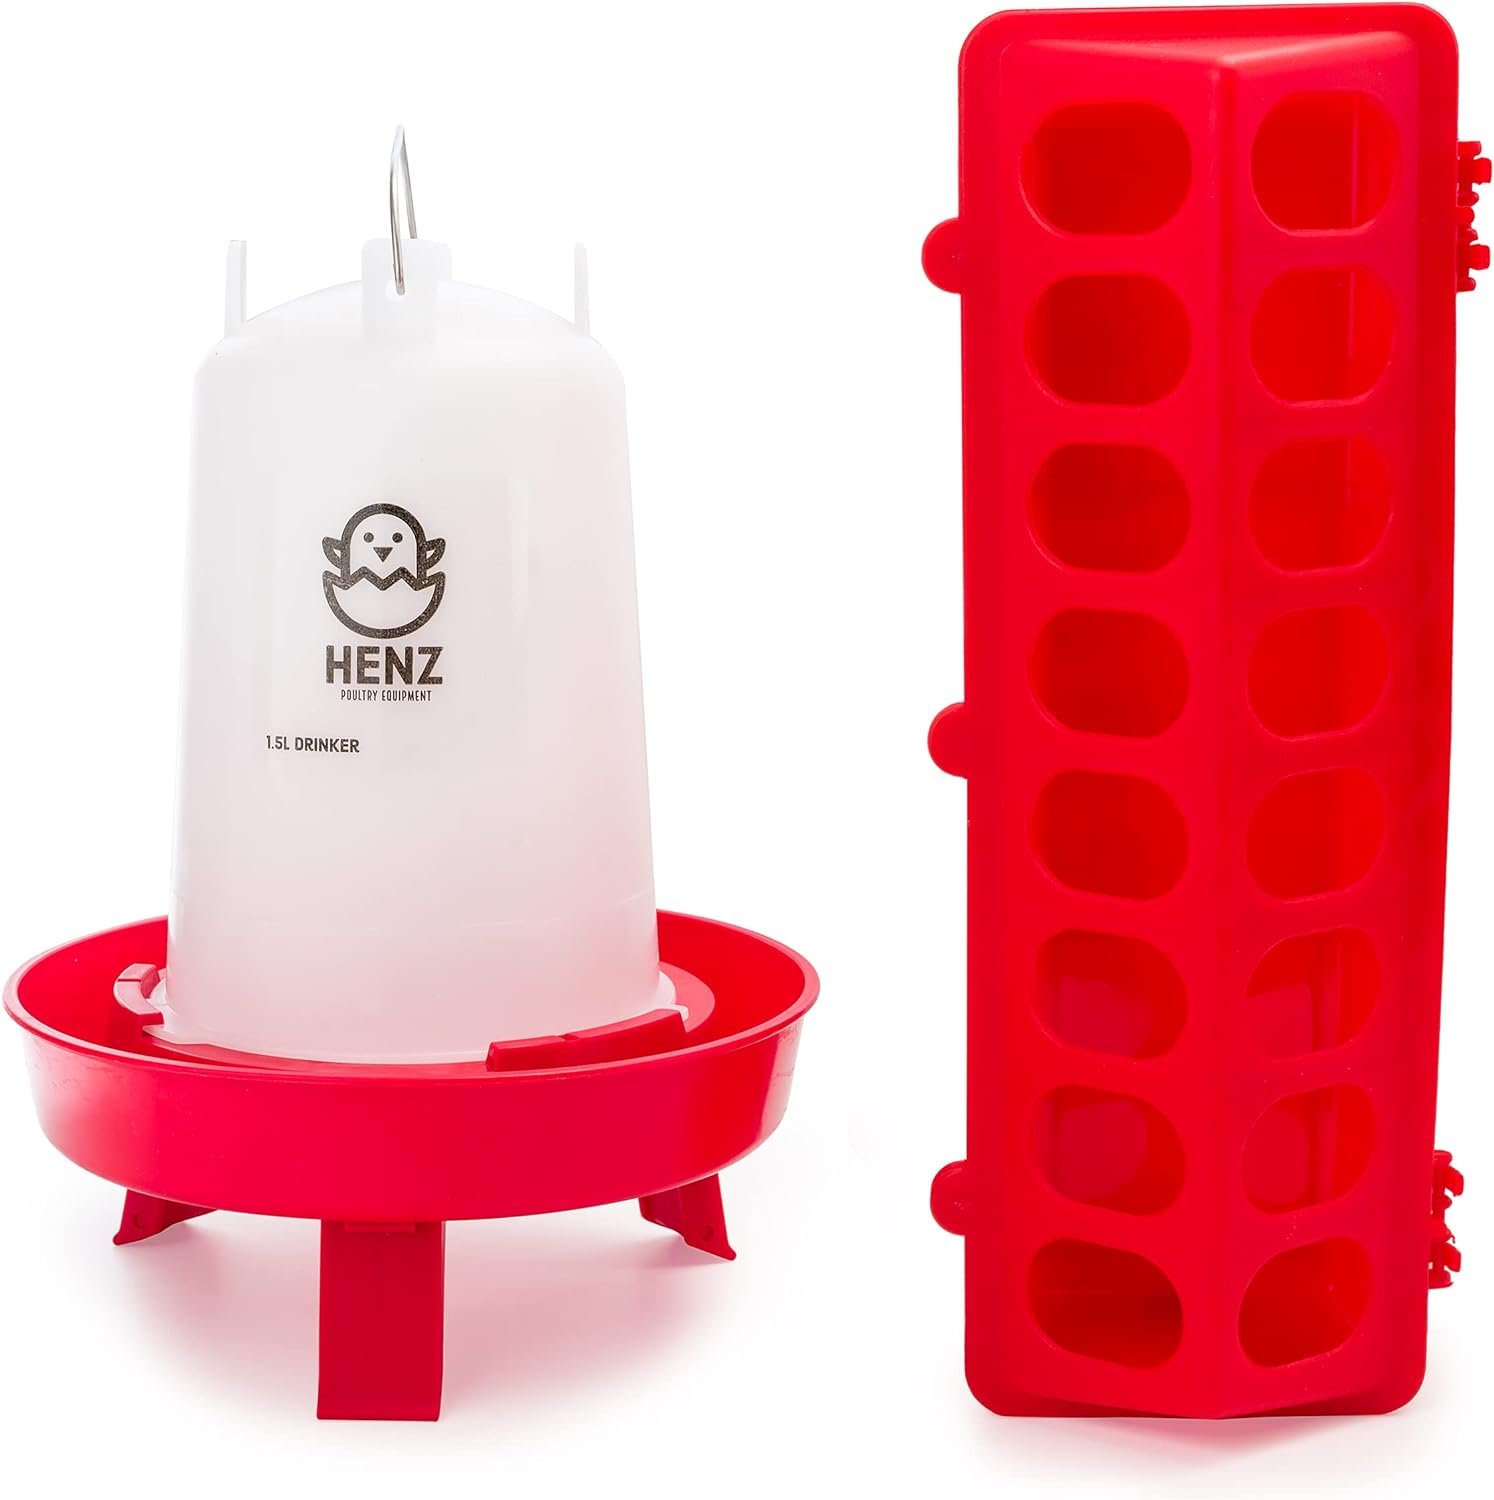 Henz Chick 16 Hole Ground Chick Feeder and Waterer Kit (Red), Easy Filling, Small Hanging Handle, Adjustable Leg Height Setting, Baby Chickens Feeder and Automatic Waterer Set Kit for Beginners